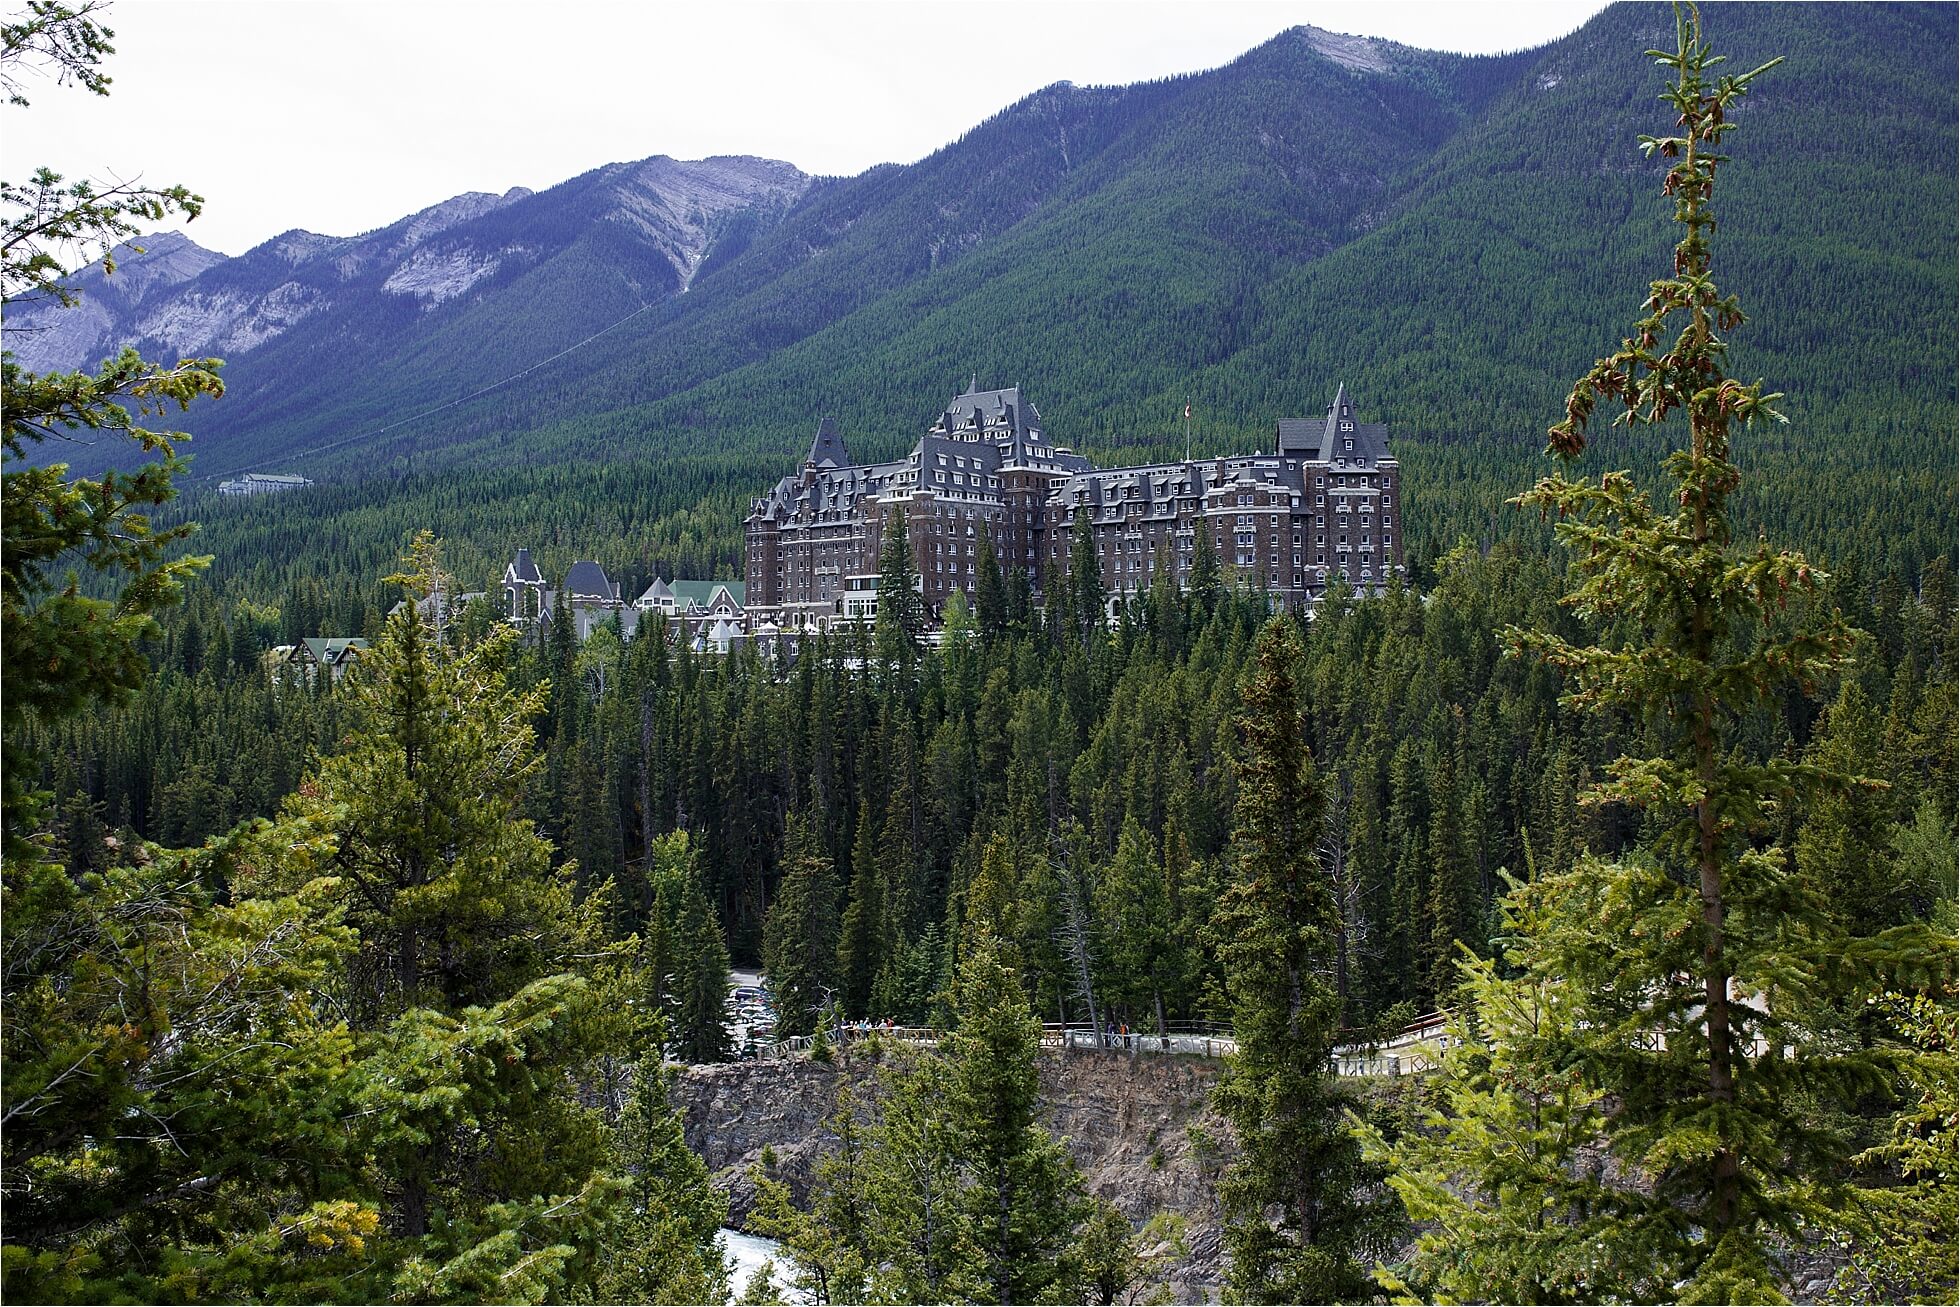 Where to Stay in Banff, Canada - The Fairmont Banff Springs